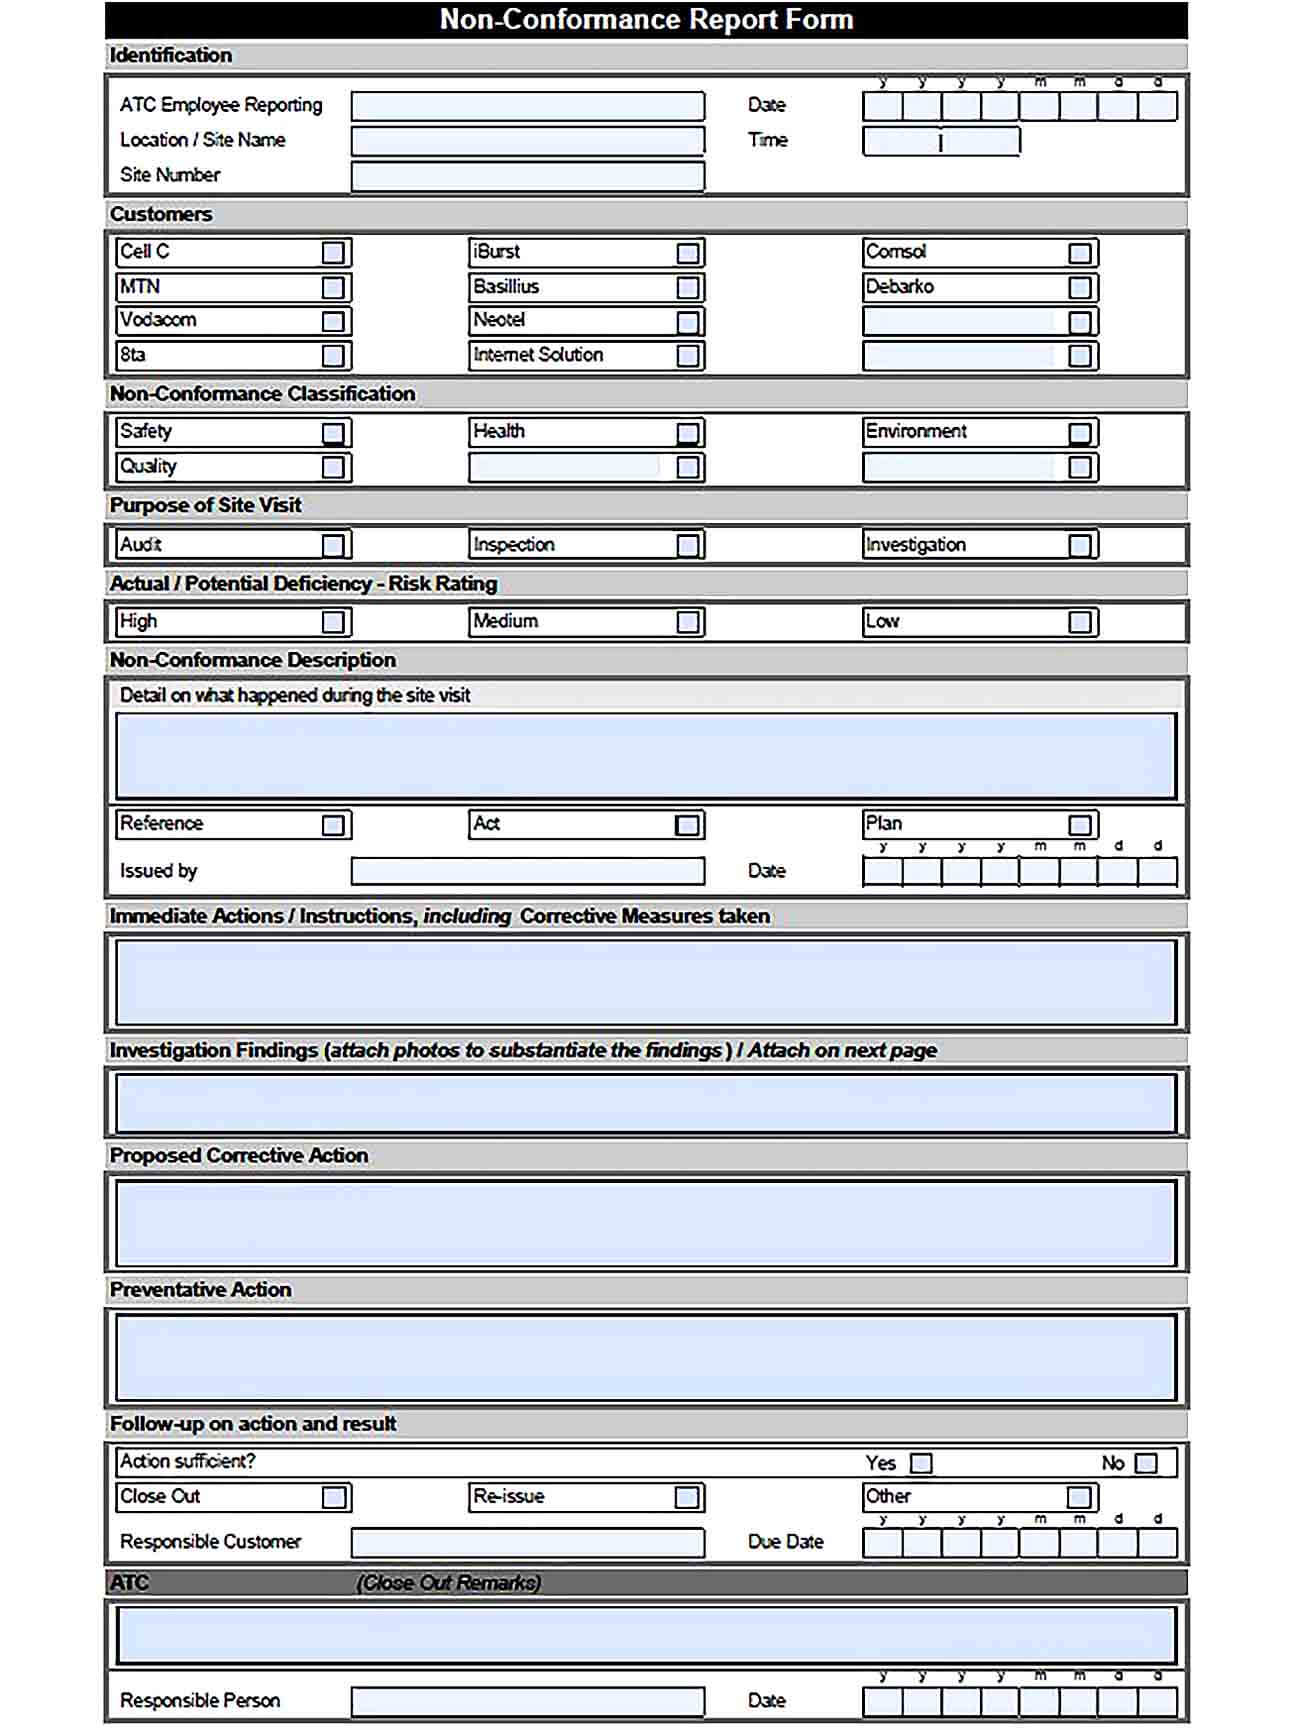 Sample Safety Non Conformance Report Template